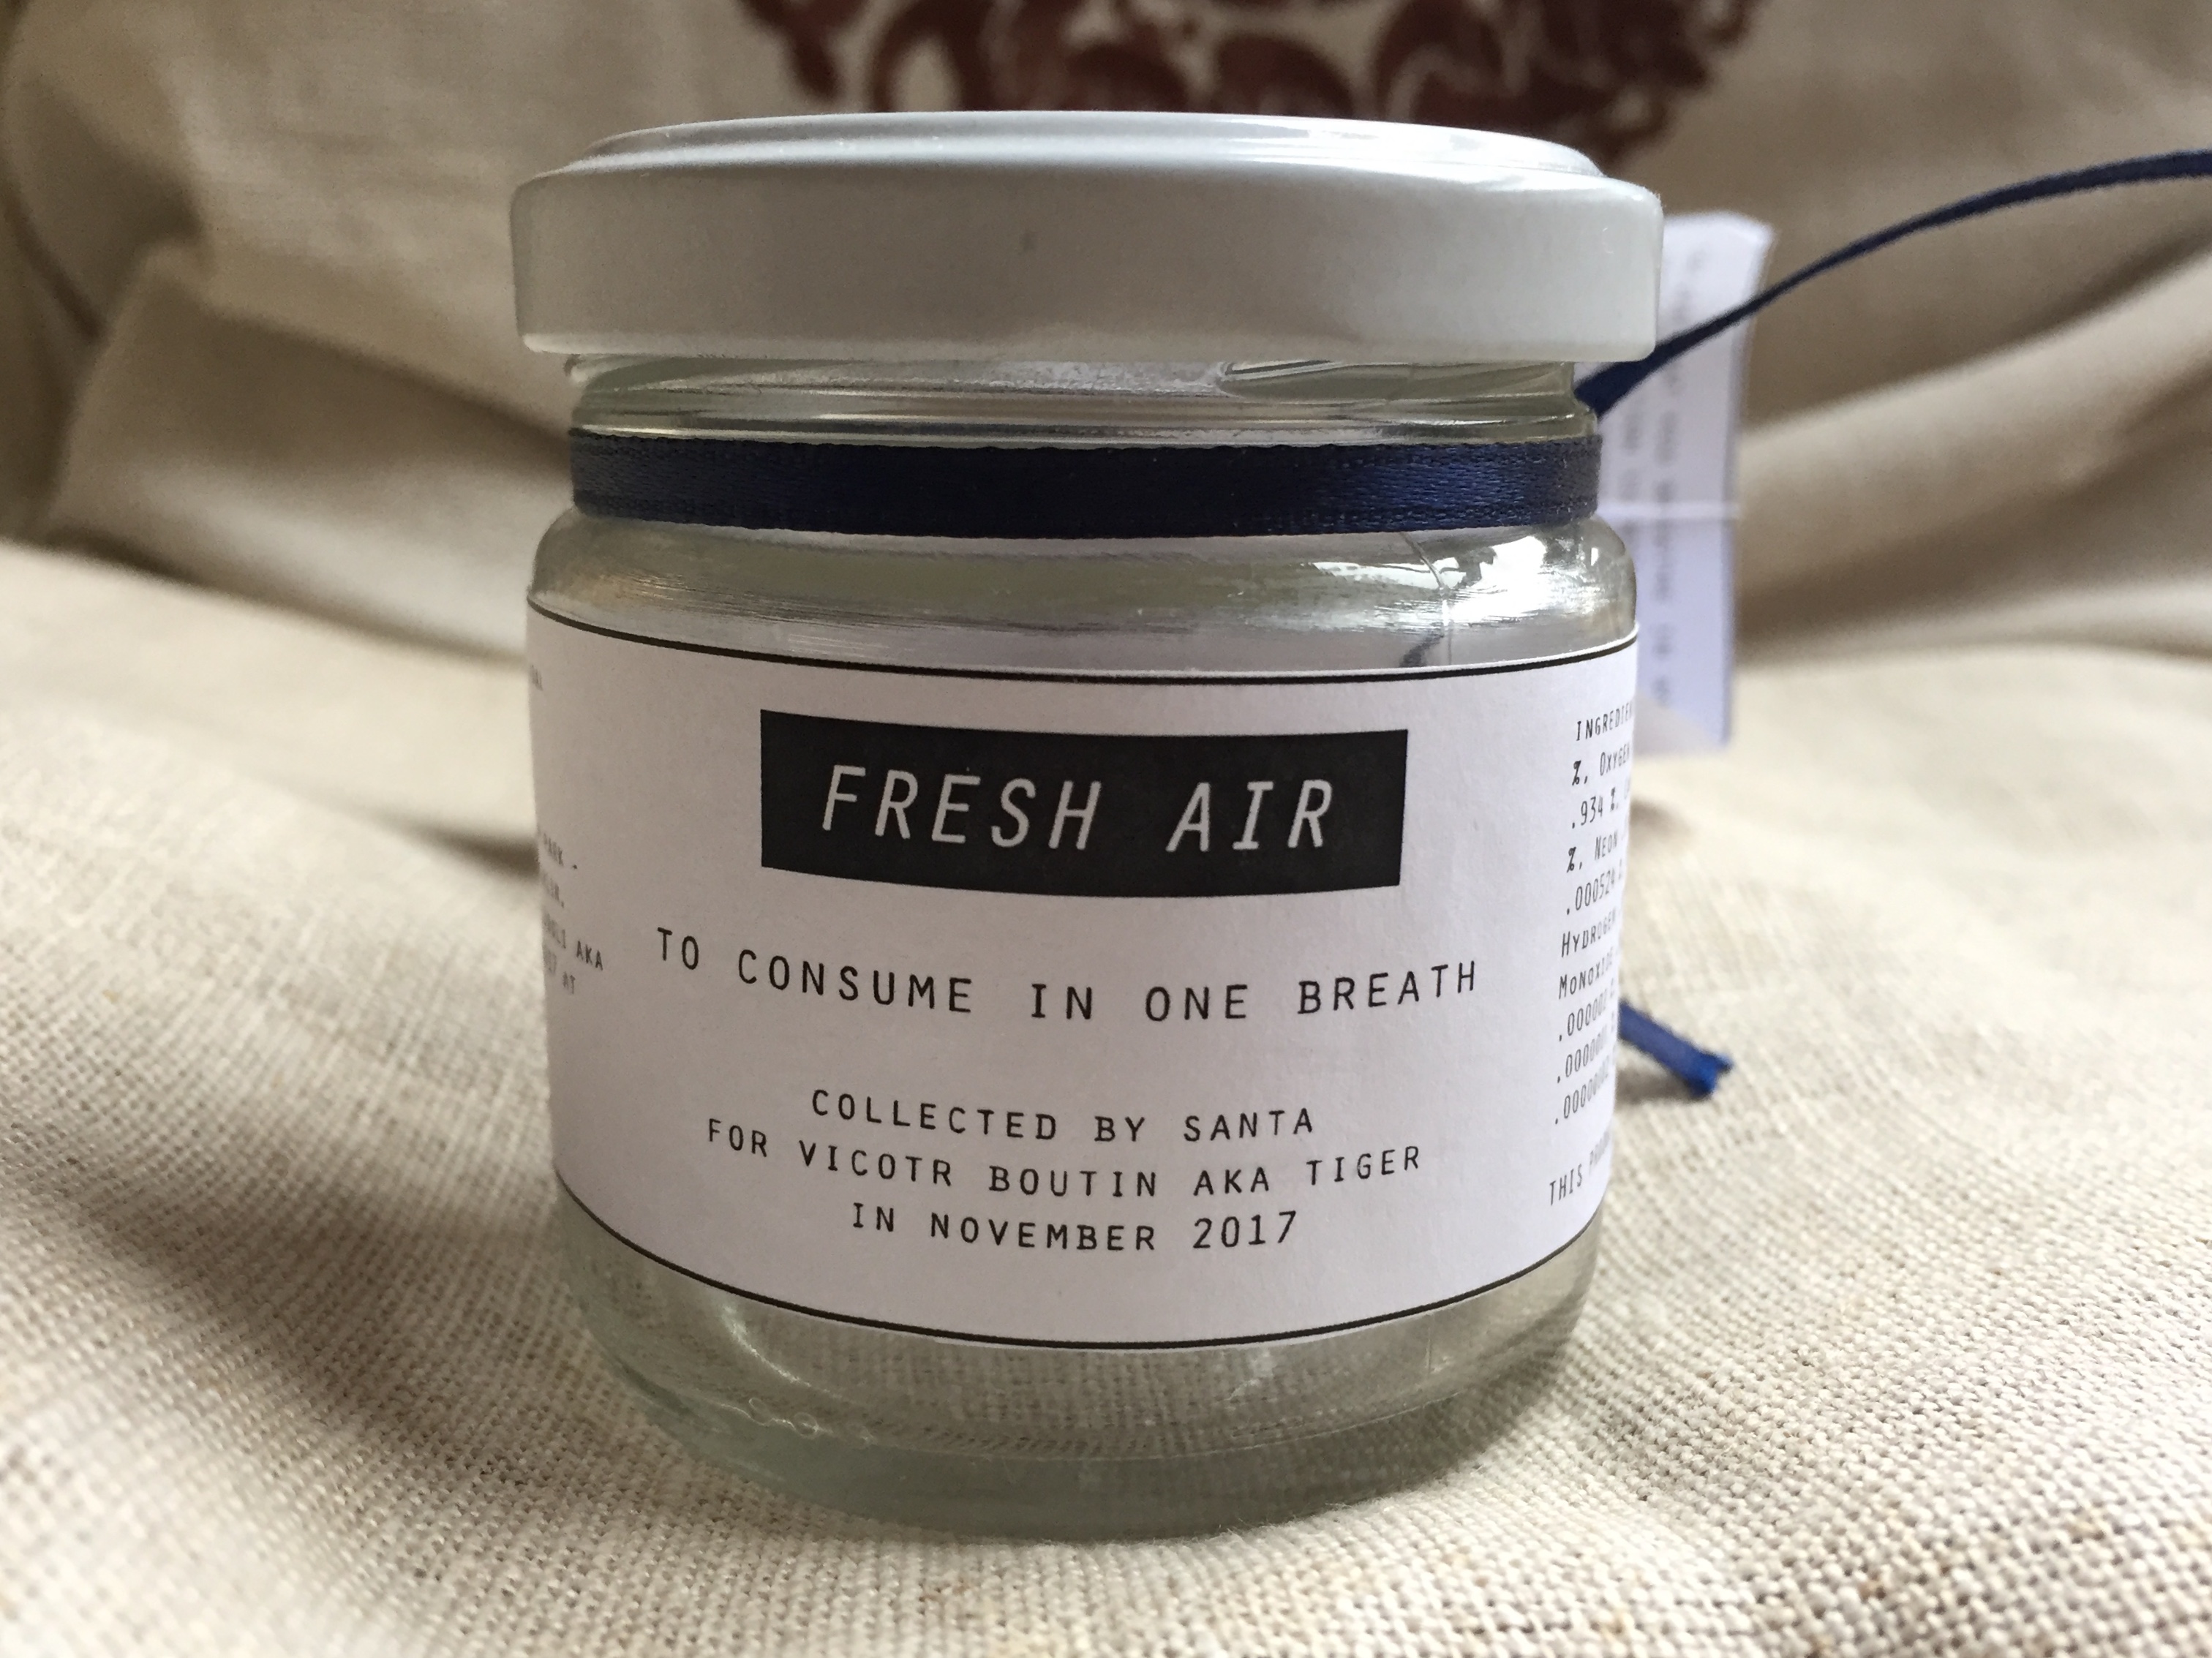 A small jar filled with fresh air